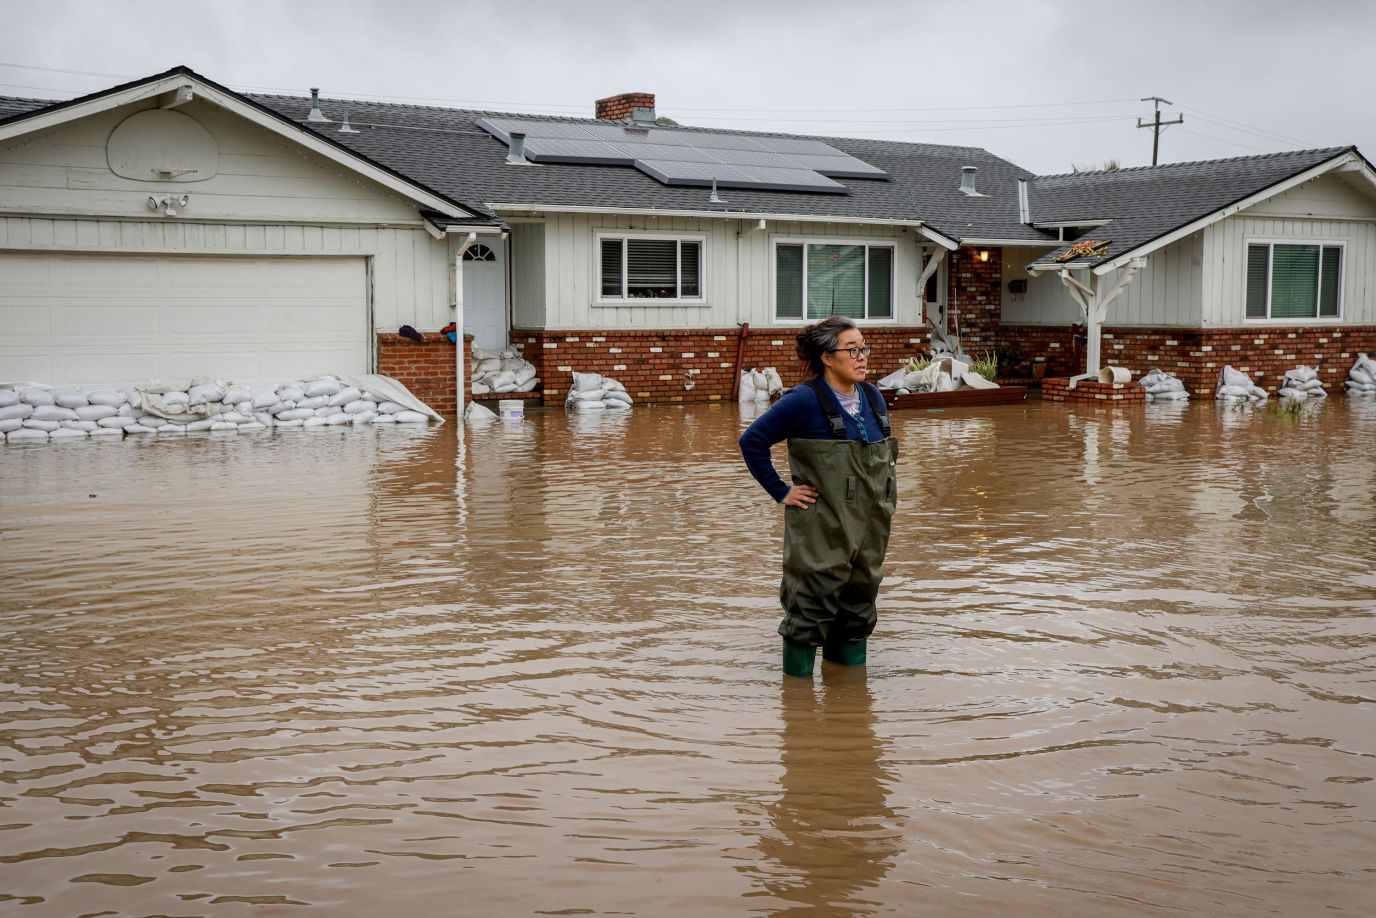 A Californian stands knee deep in brown floodwater in front of a solar-powered home with sandbags